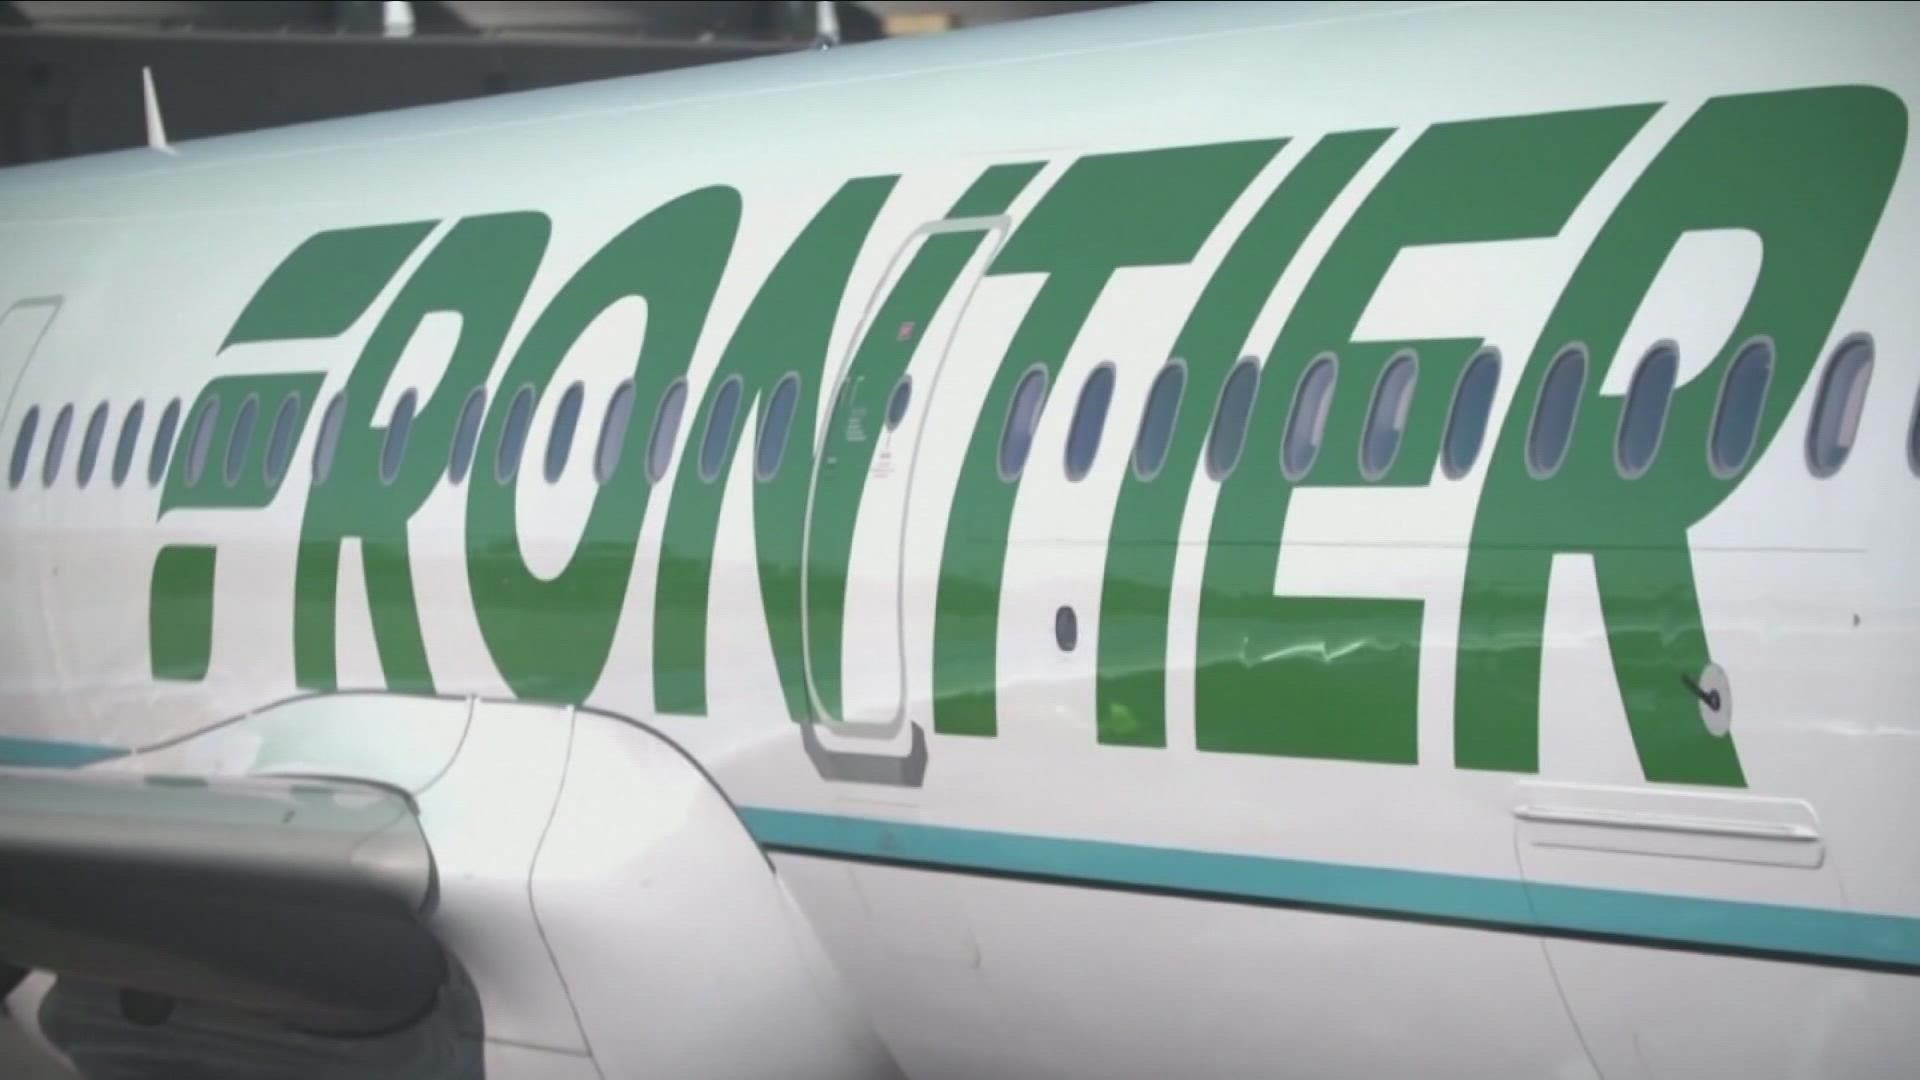 Frontier Airlines is adding direct flights in and out of the Buffalo Niagara International Airport.
Starting today -- there's non-stop service to Las Vegas.